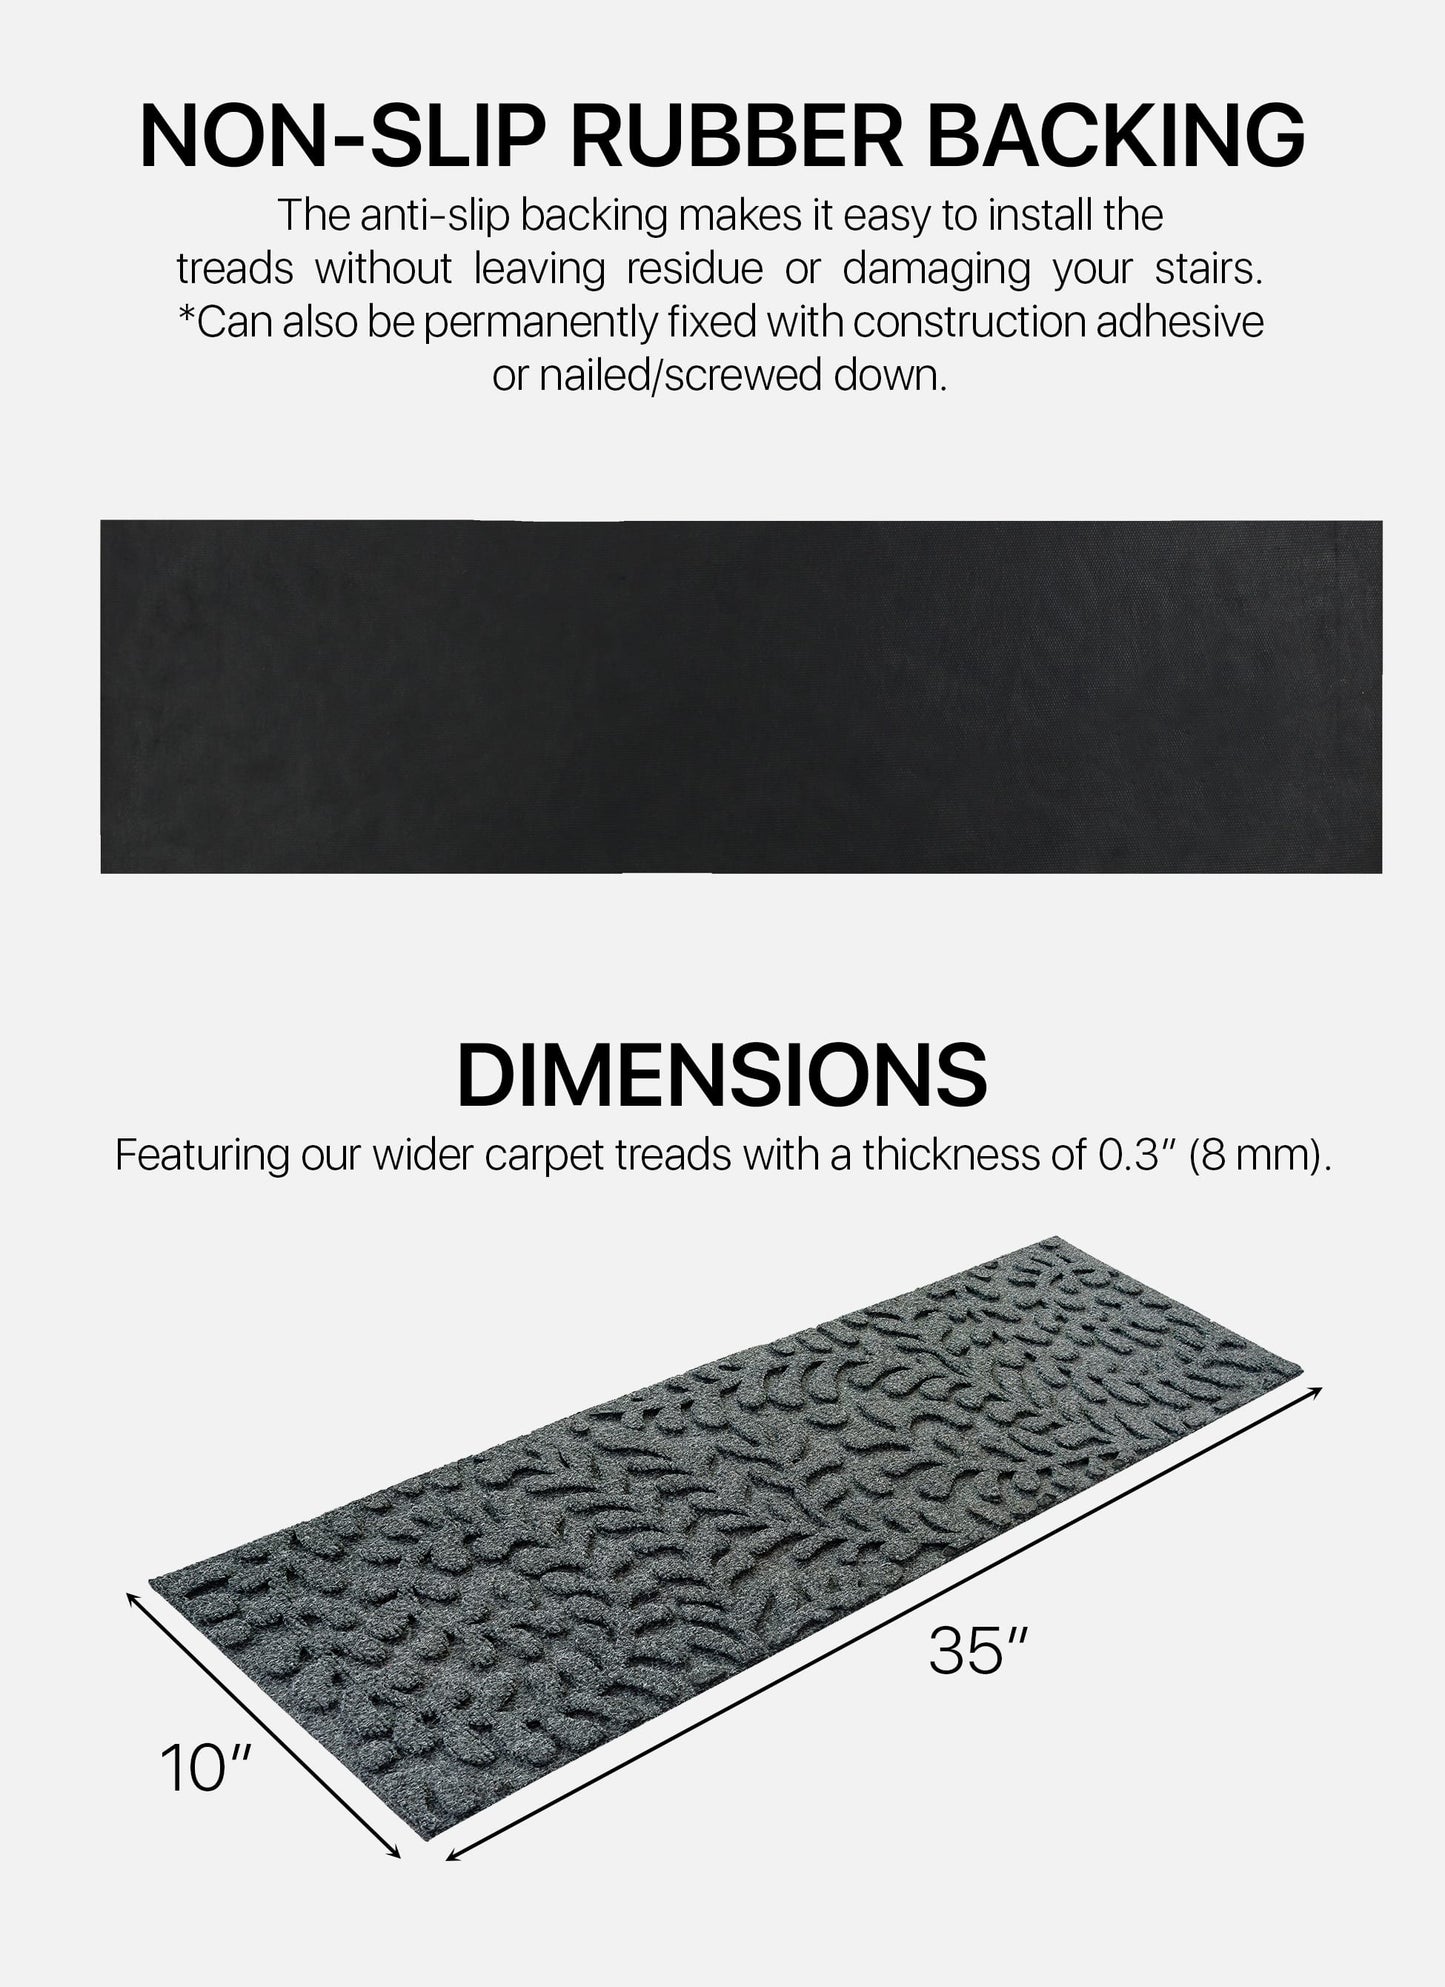 Waterhog Carpet Treads with Rubber Backing for Outdoor Stairs with Floral Design